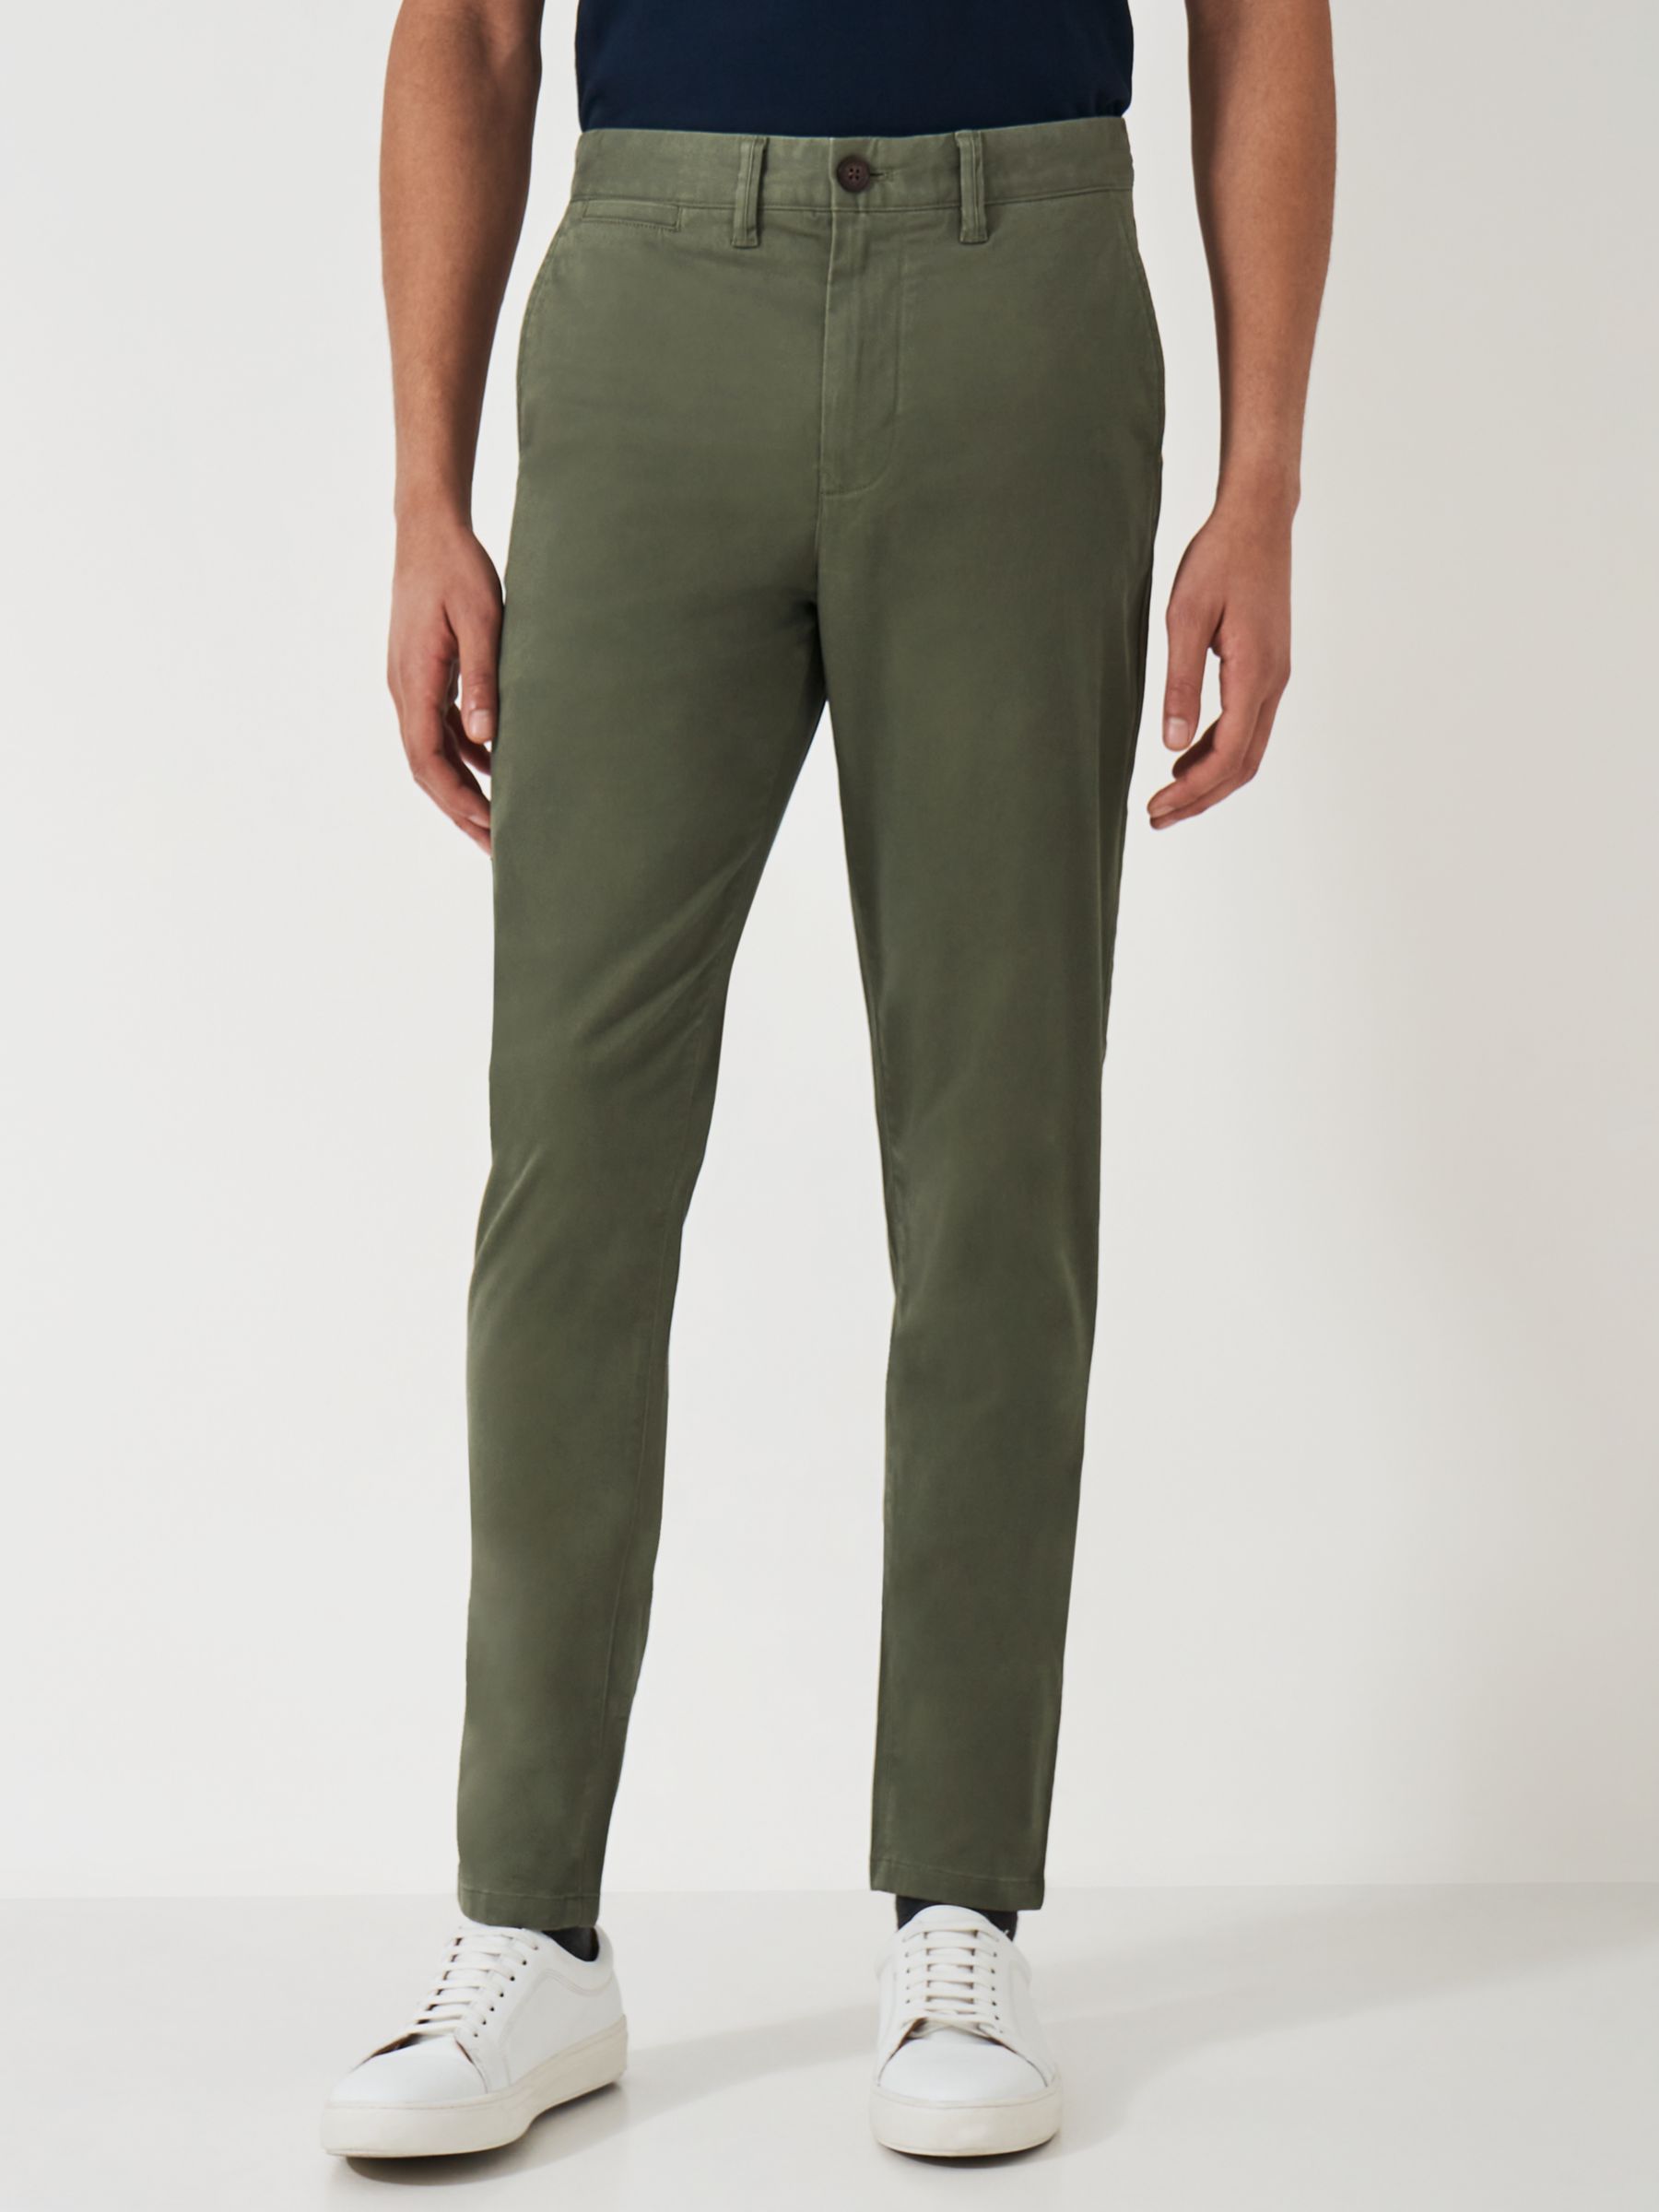 Crew Clothing Slim Fit Chinos, Green at John Lewis & Partners